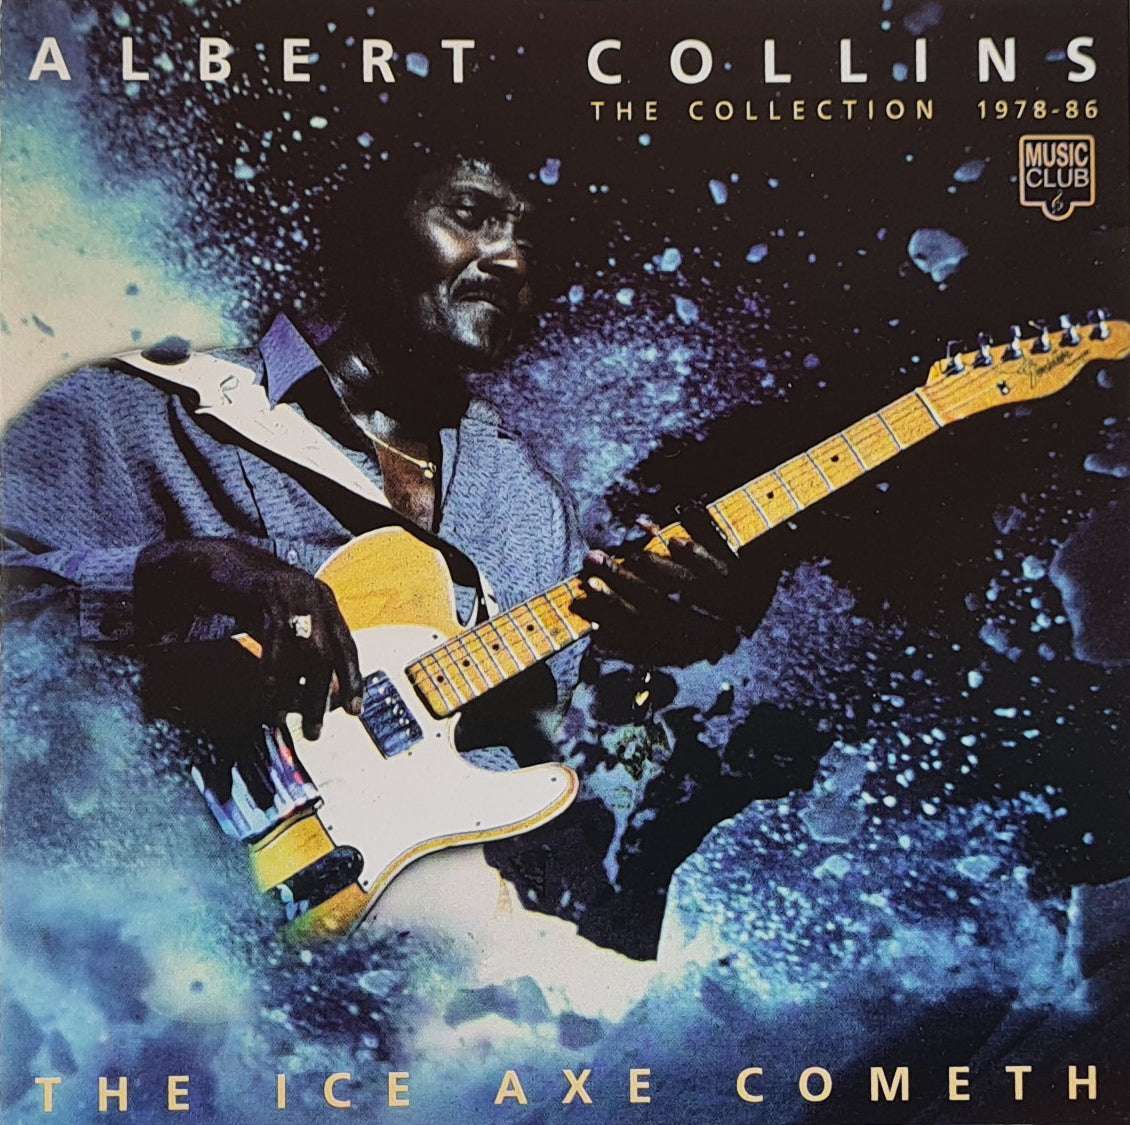 Albert Collins - The Ice Axe Cometh - The Collection 1978-86 (CD)